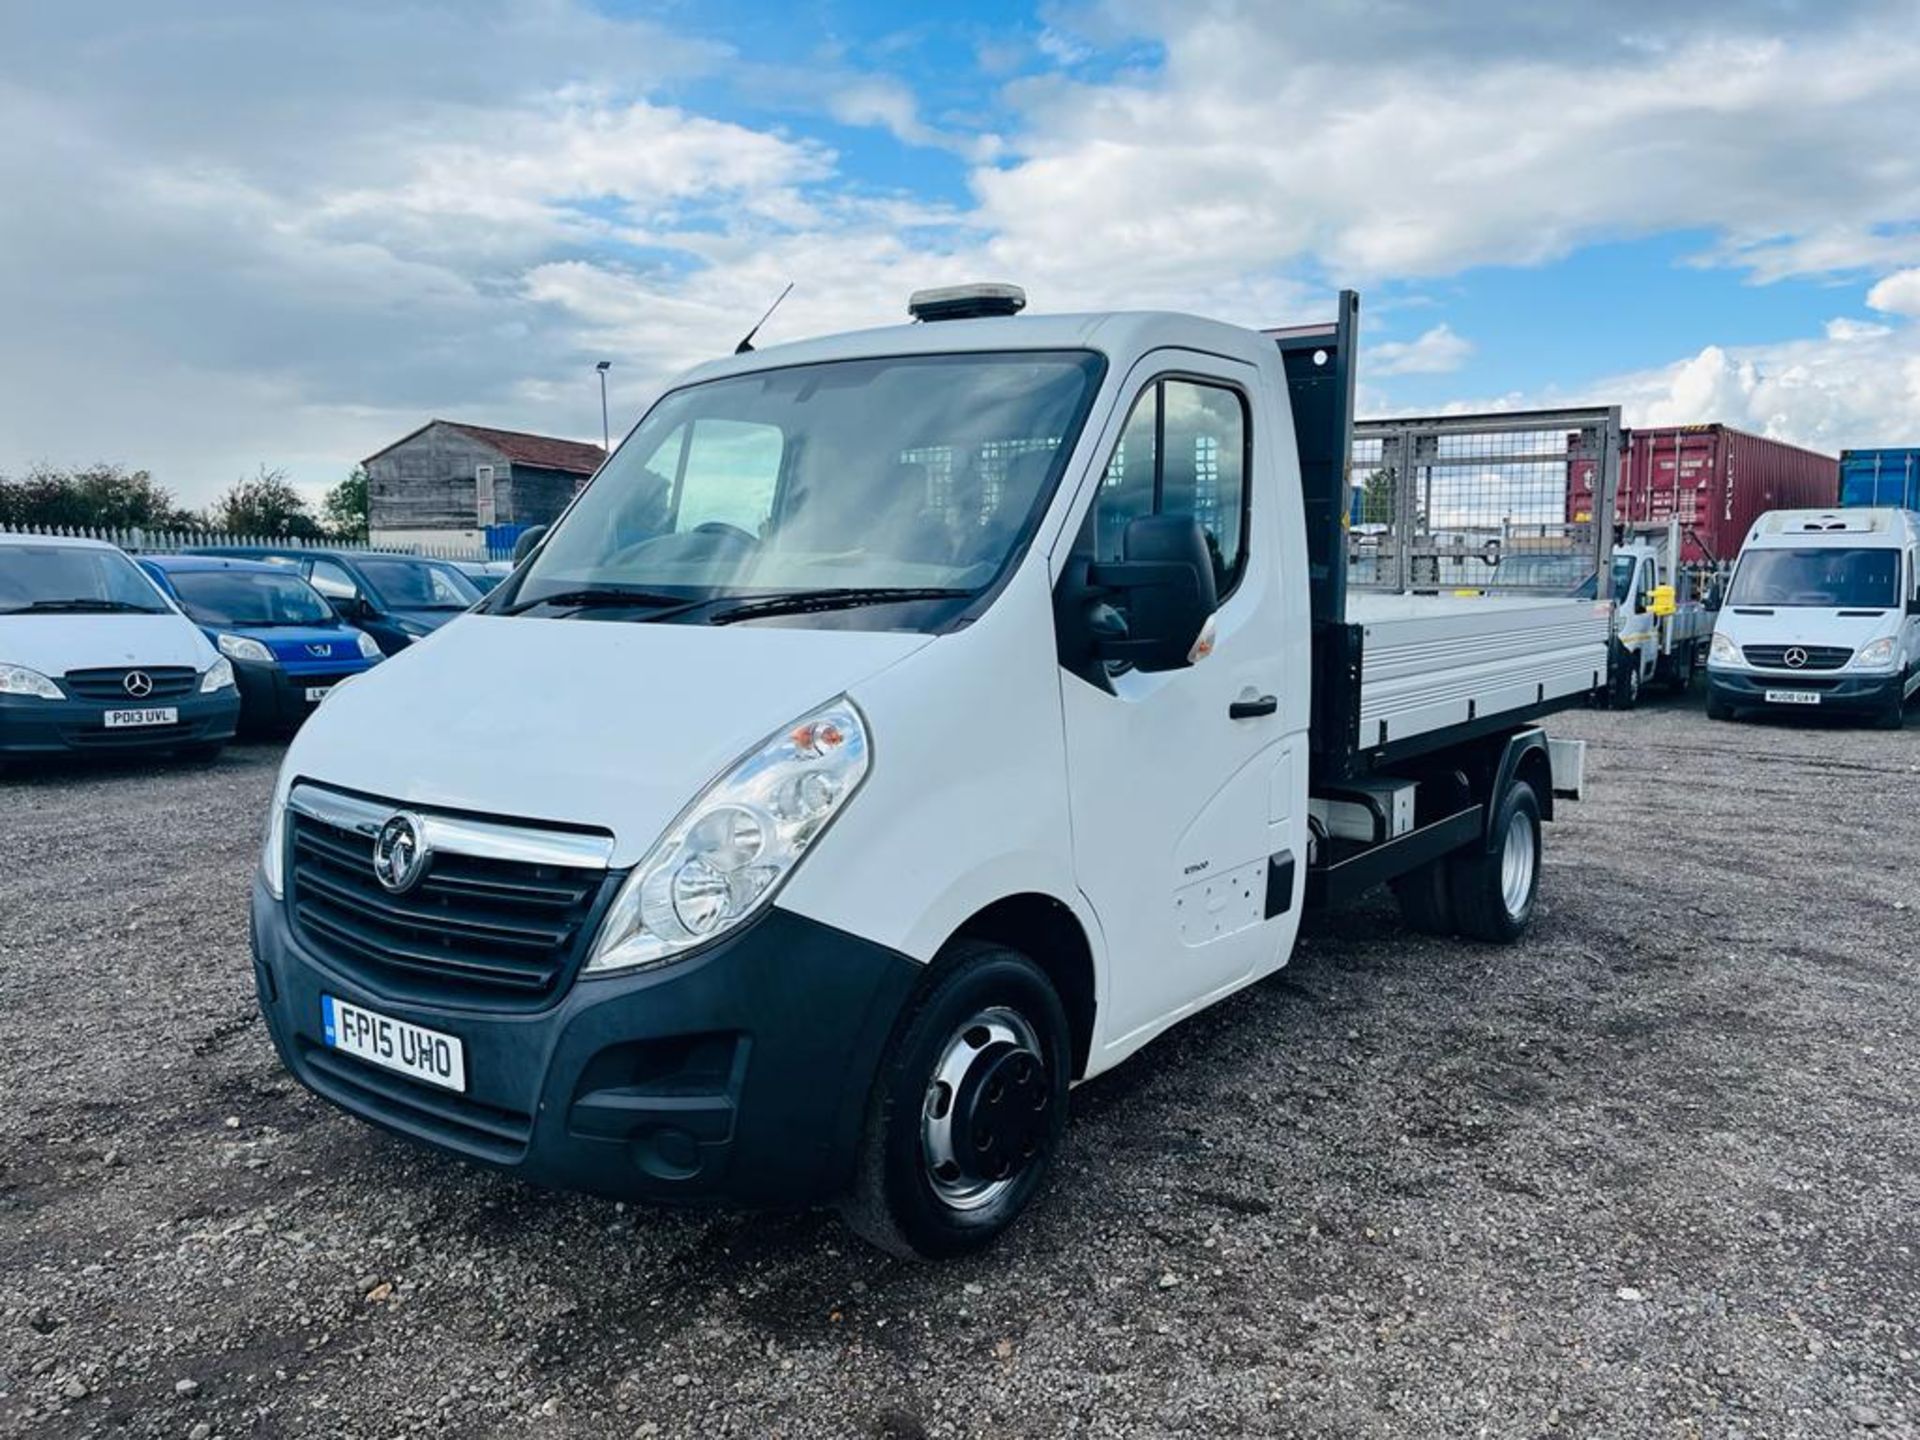 ** ON SALE ** Vauxhall Movano 2.3 CDTI RWD TRW R3500 2015 '15 Reg' Tipper - Only 110,779 Miles - Image 16 of 29